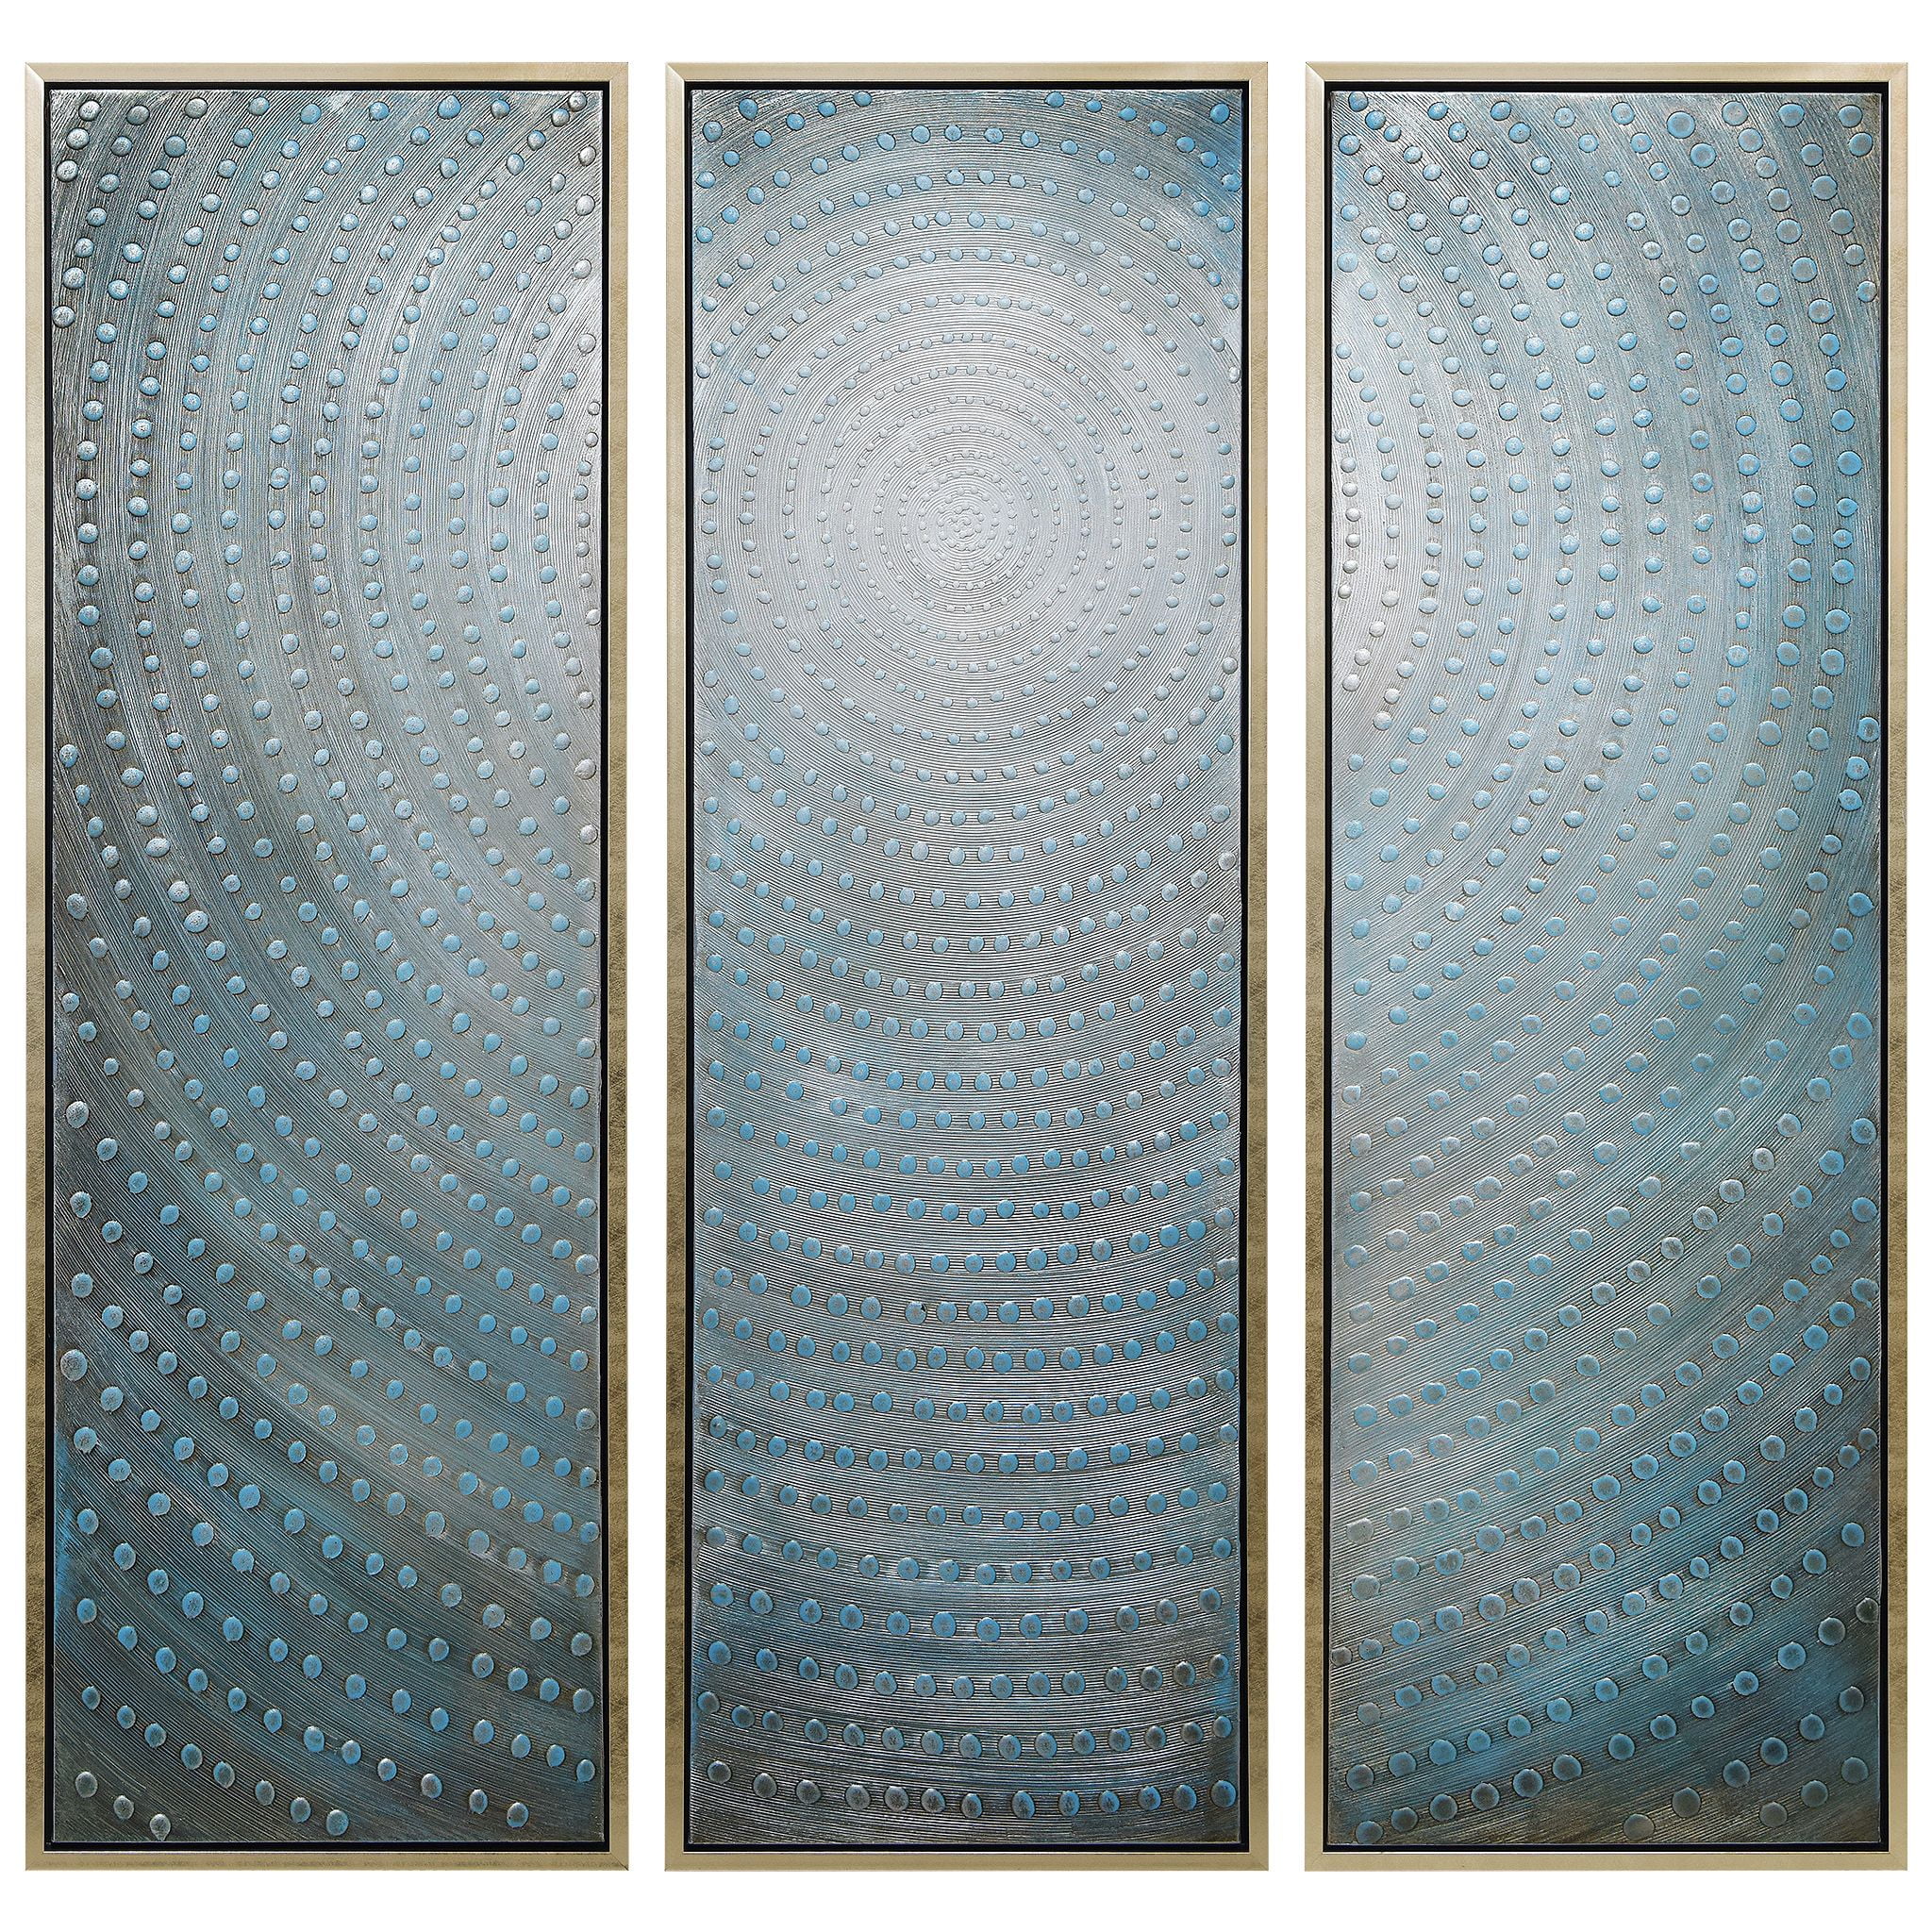 Empire Art Direct Concentric Textured Metallic Hand Painted Triptych Wall  Art, 60